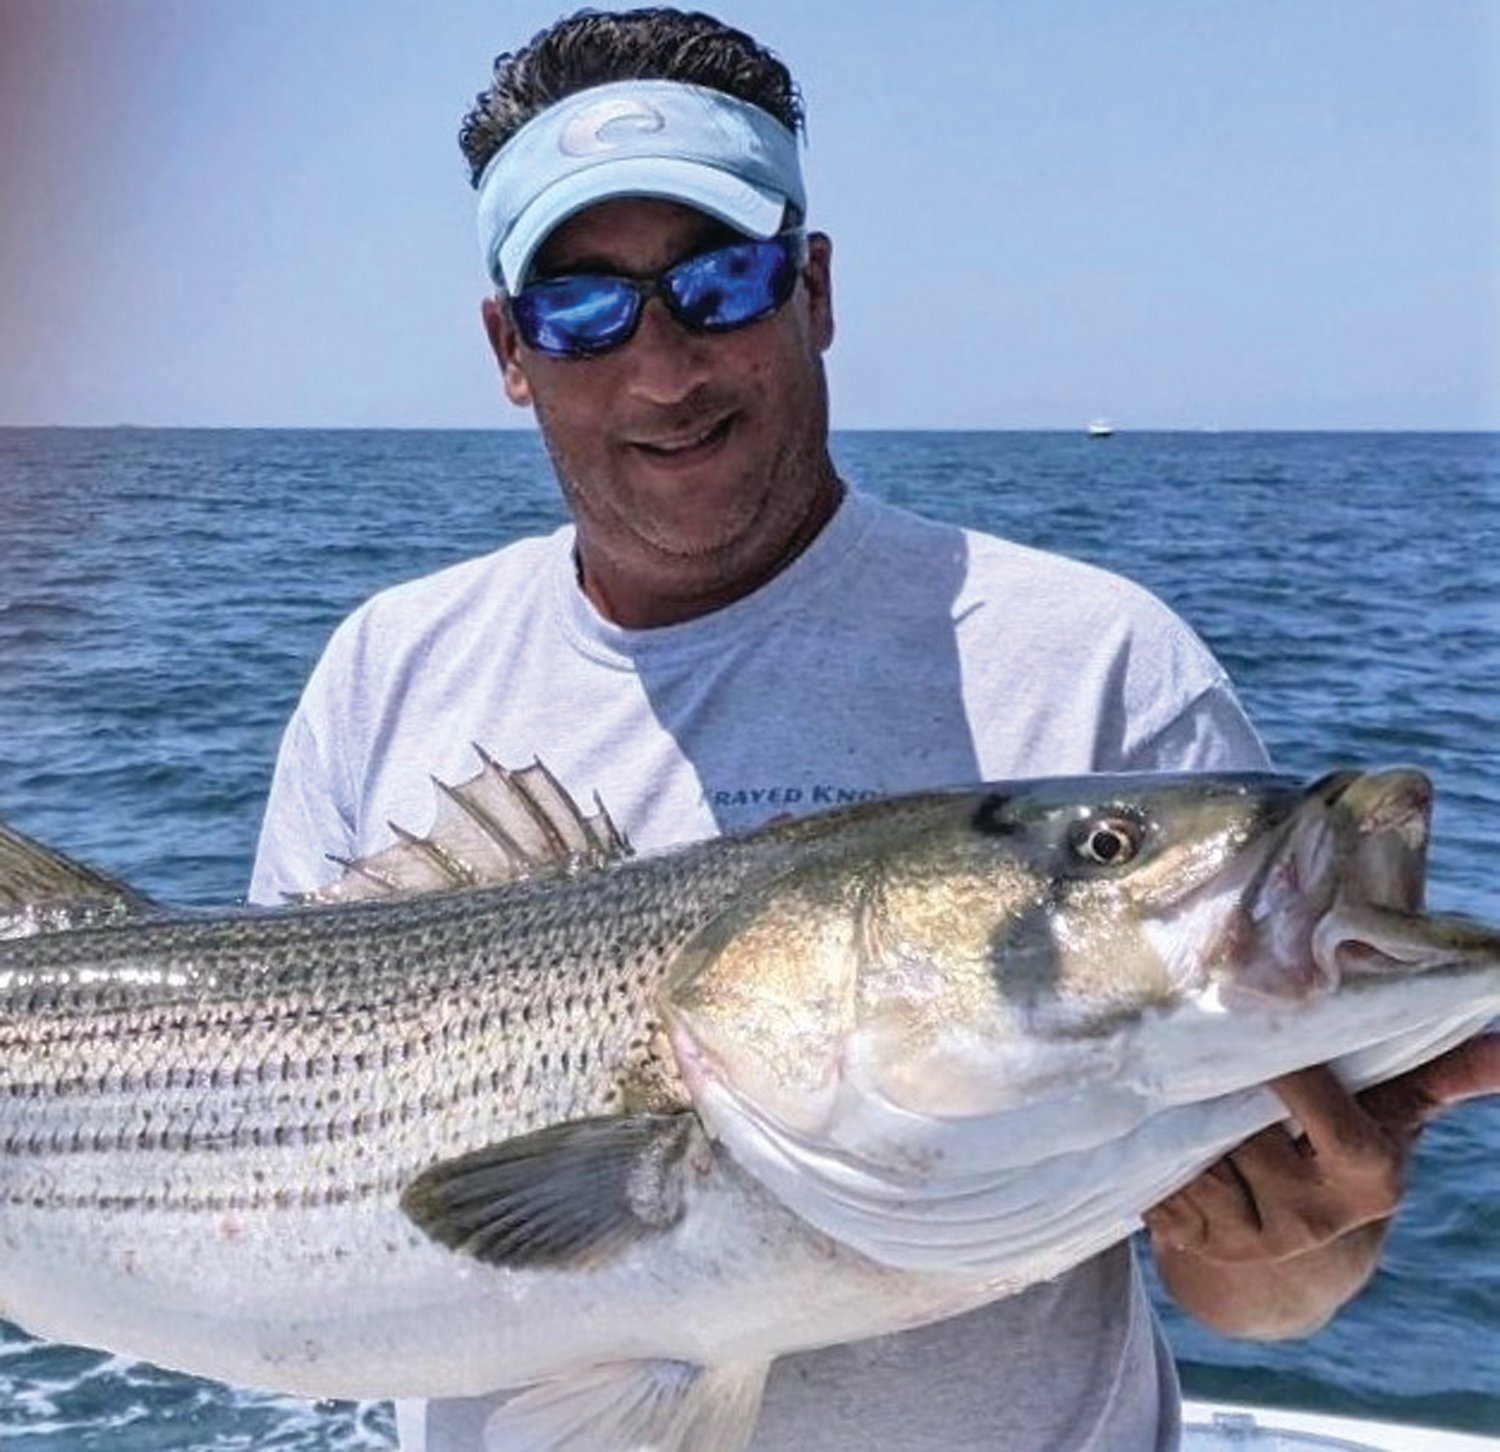 WINNING BASS: Capt. Richard Lipsitz of North Kingstown with the 47.5-inch striped bass that took first place and capped the top “Team” award for team Frayed Knot in the Block Island Inshore Fishing Tournament last year.